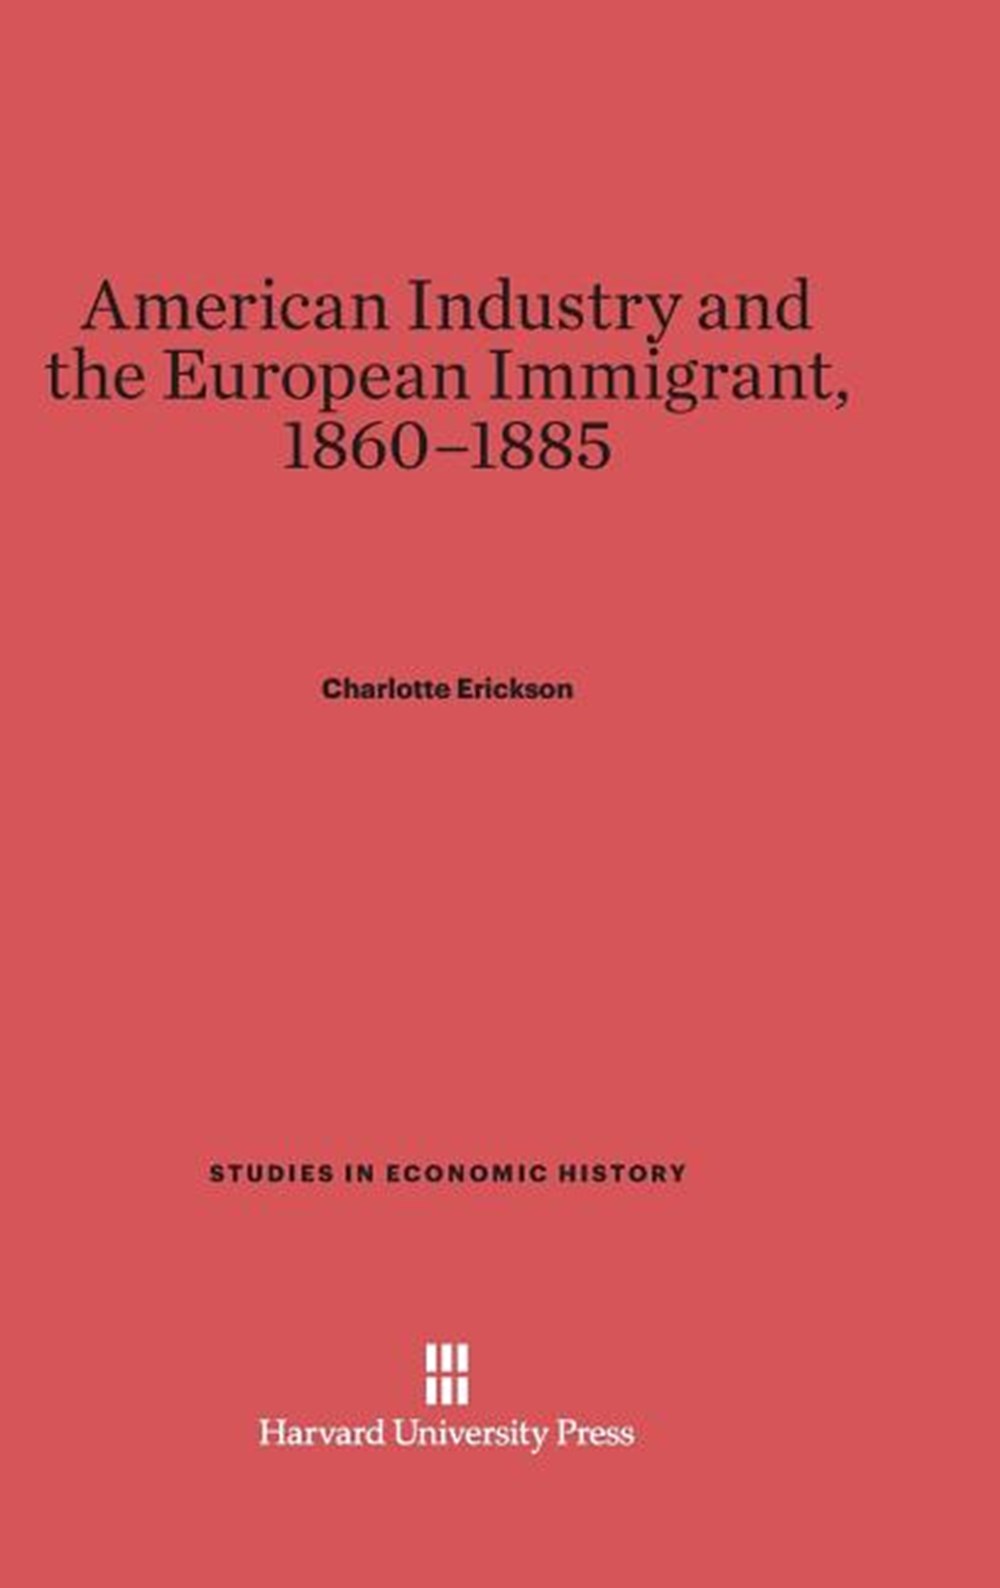 American Industry and the European Immigrant, 1860-1885 (Reprint 2014)